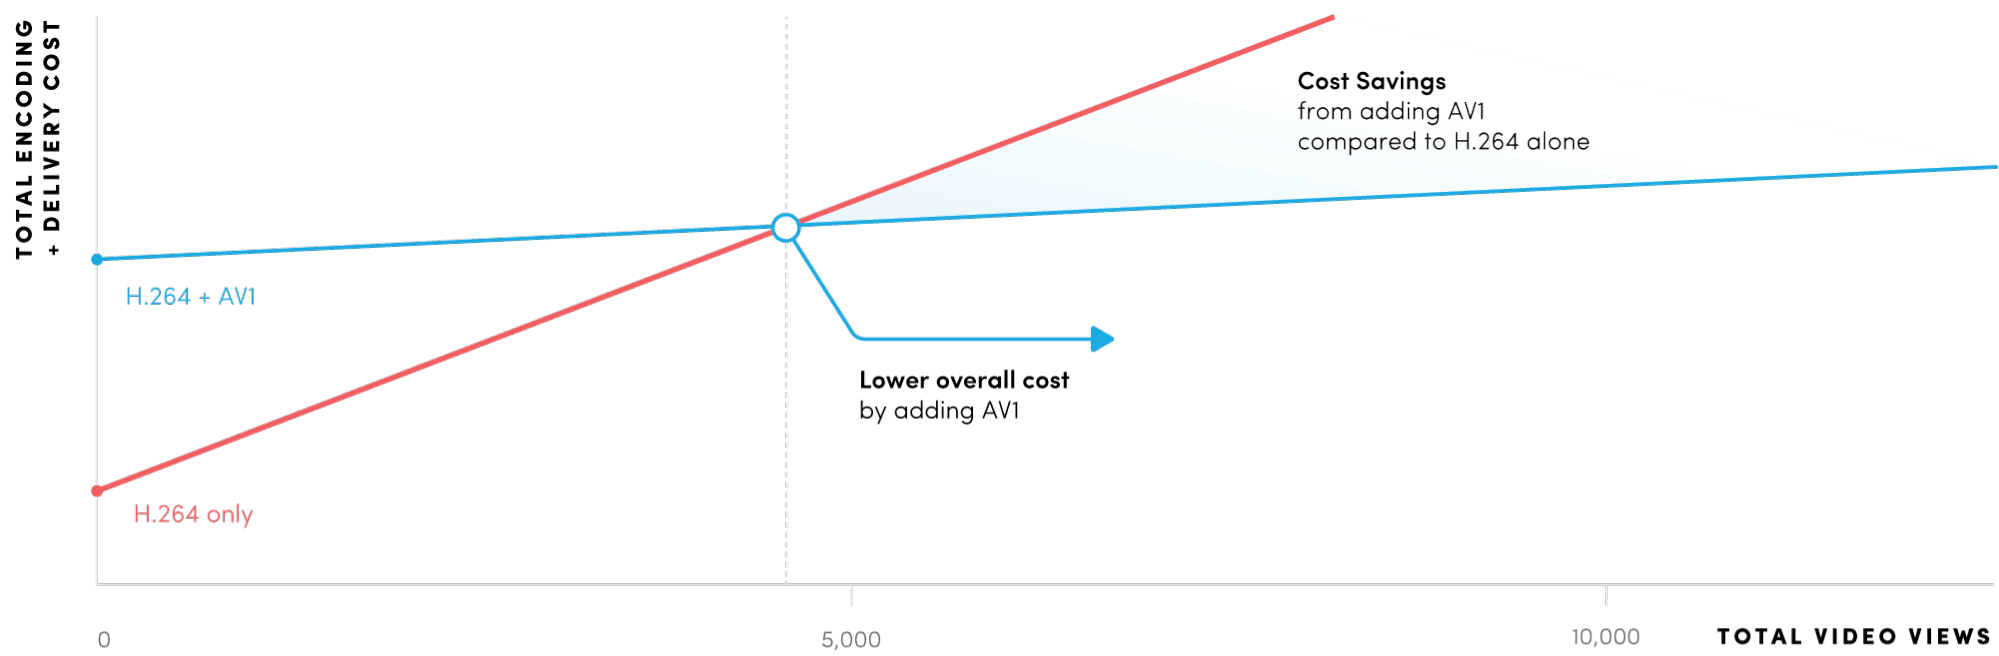 graph plotting the relationship between total cost of video encoding + delivery on one axis and total video views on the other. It shows that adding AV1 encoding can lower overall cost with as few as 4,000 views.